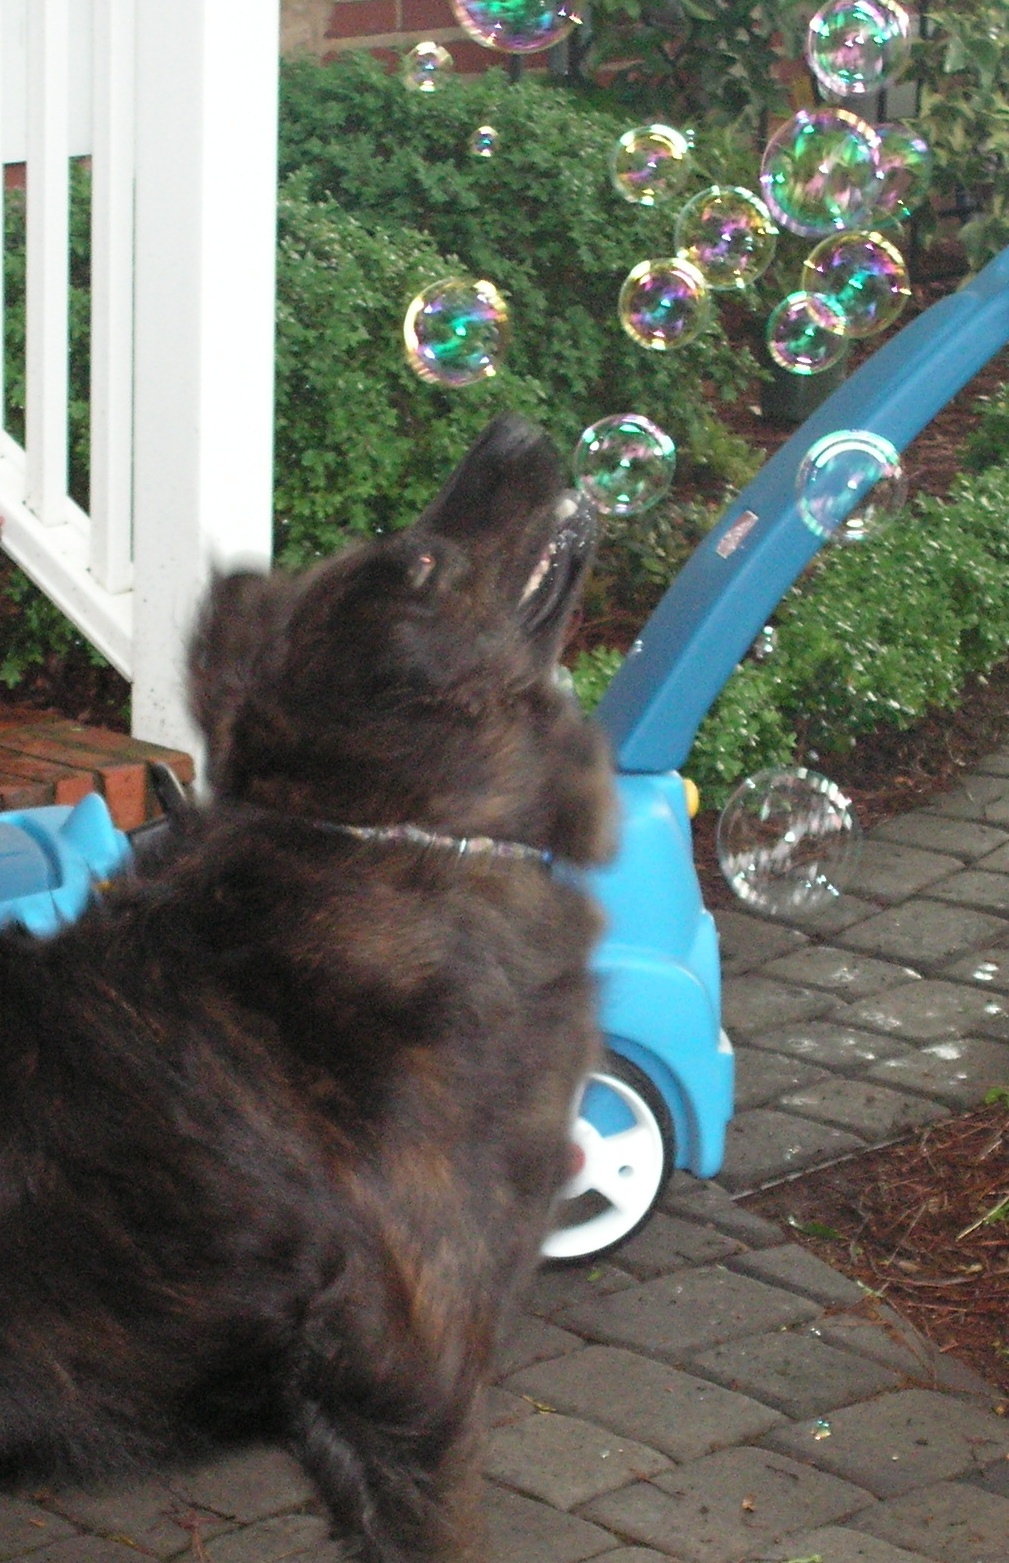 Lola washing her own mouth out with soap bubbles 